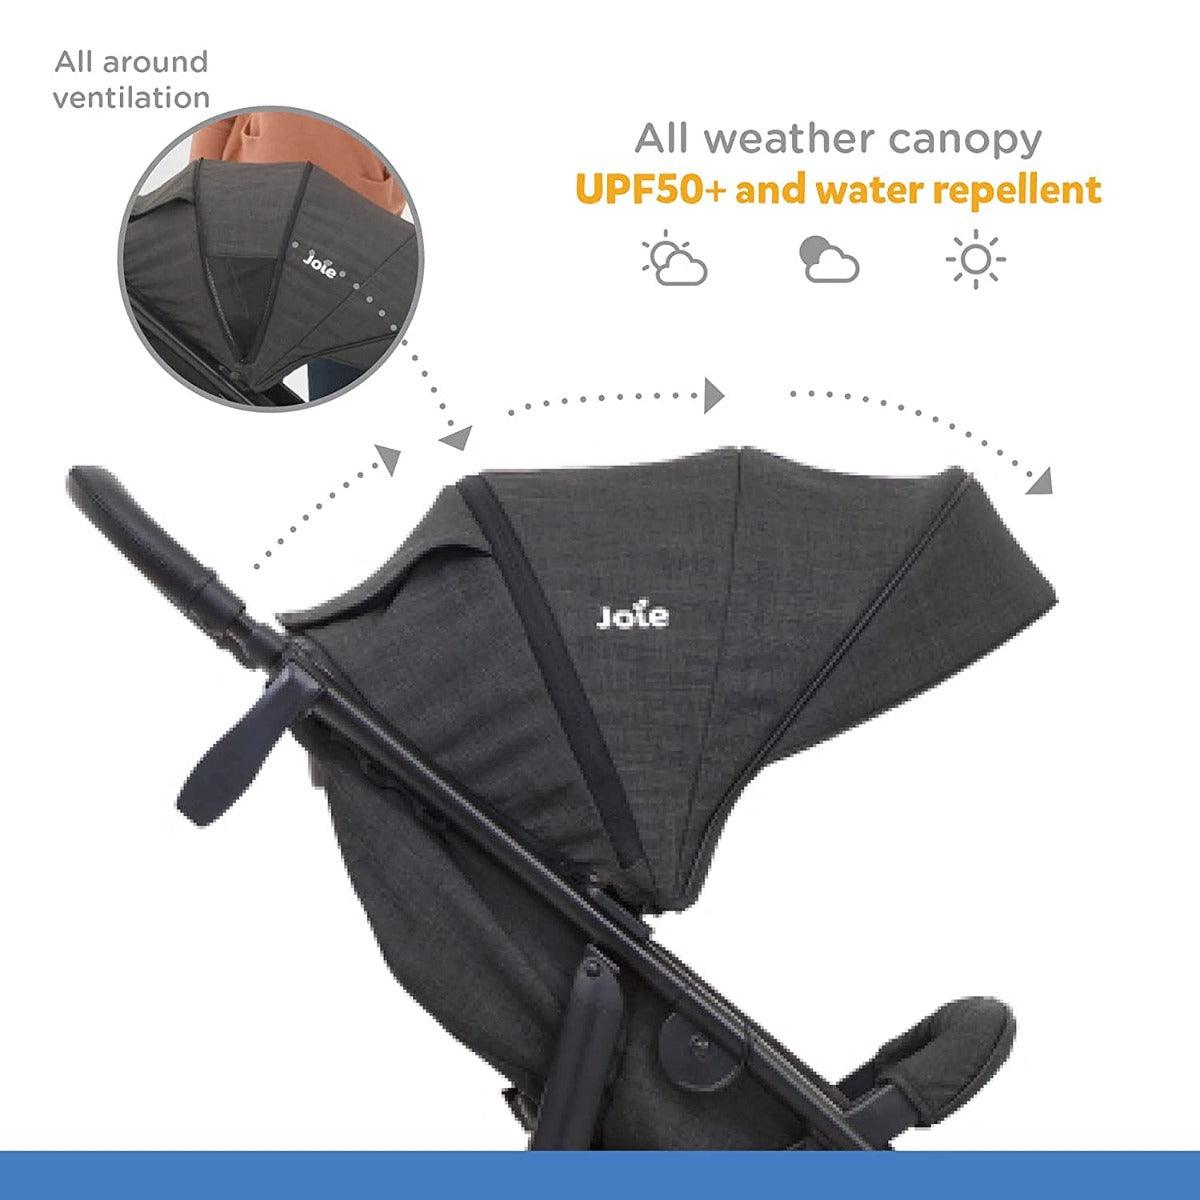 Joie Mytrax Flex Pavement Baby Pram - Baby Stroller for Ages 0-4 Years